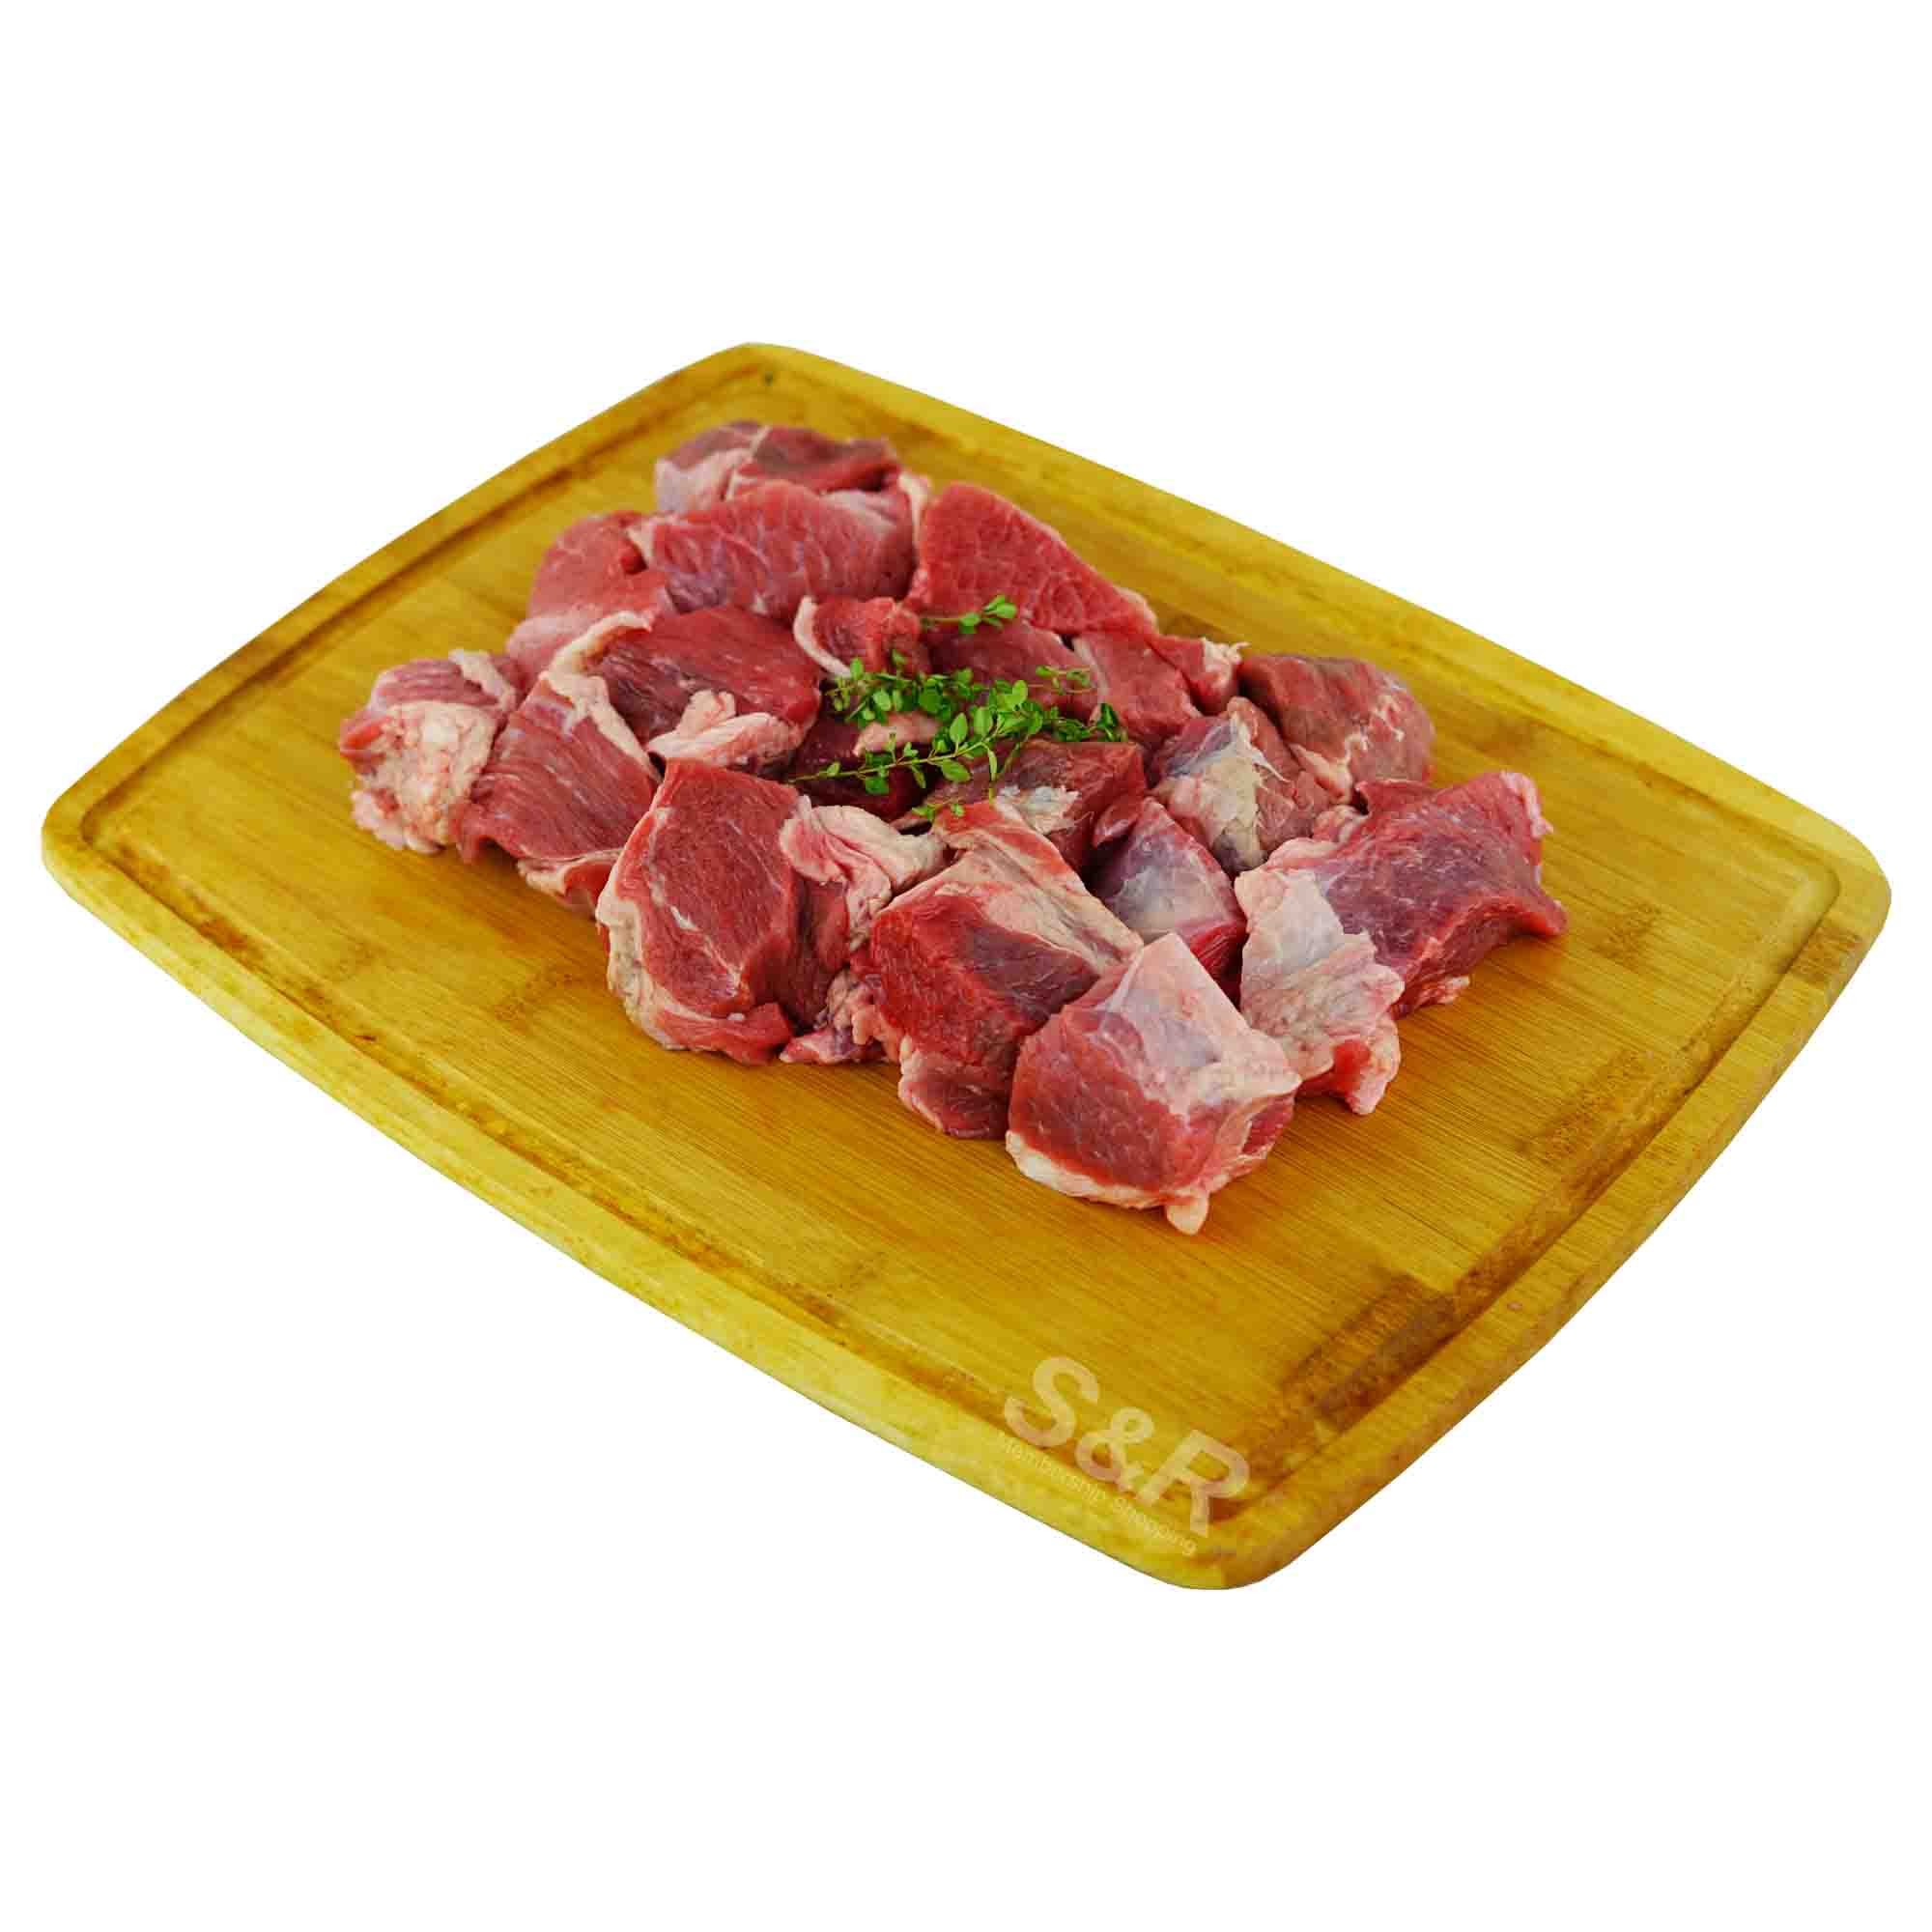 S&R Beef Stew approx. 2kg